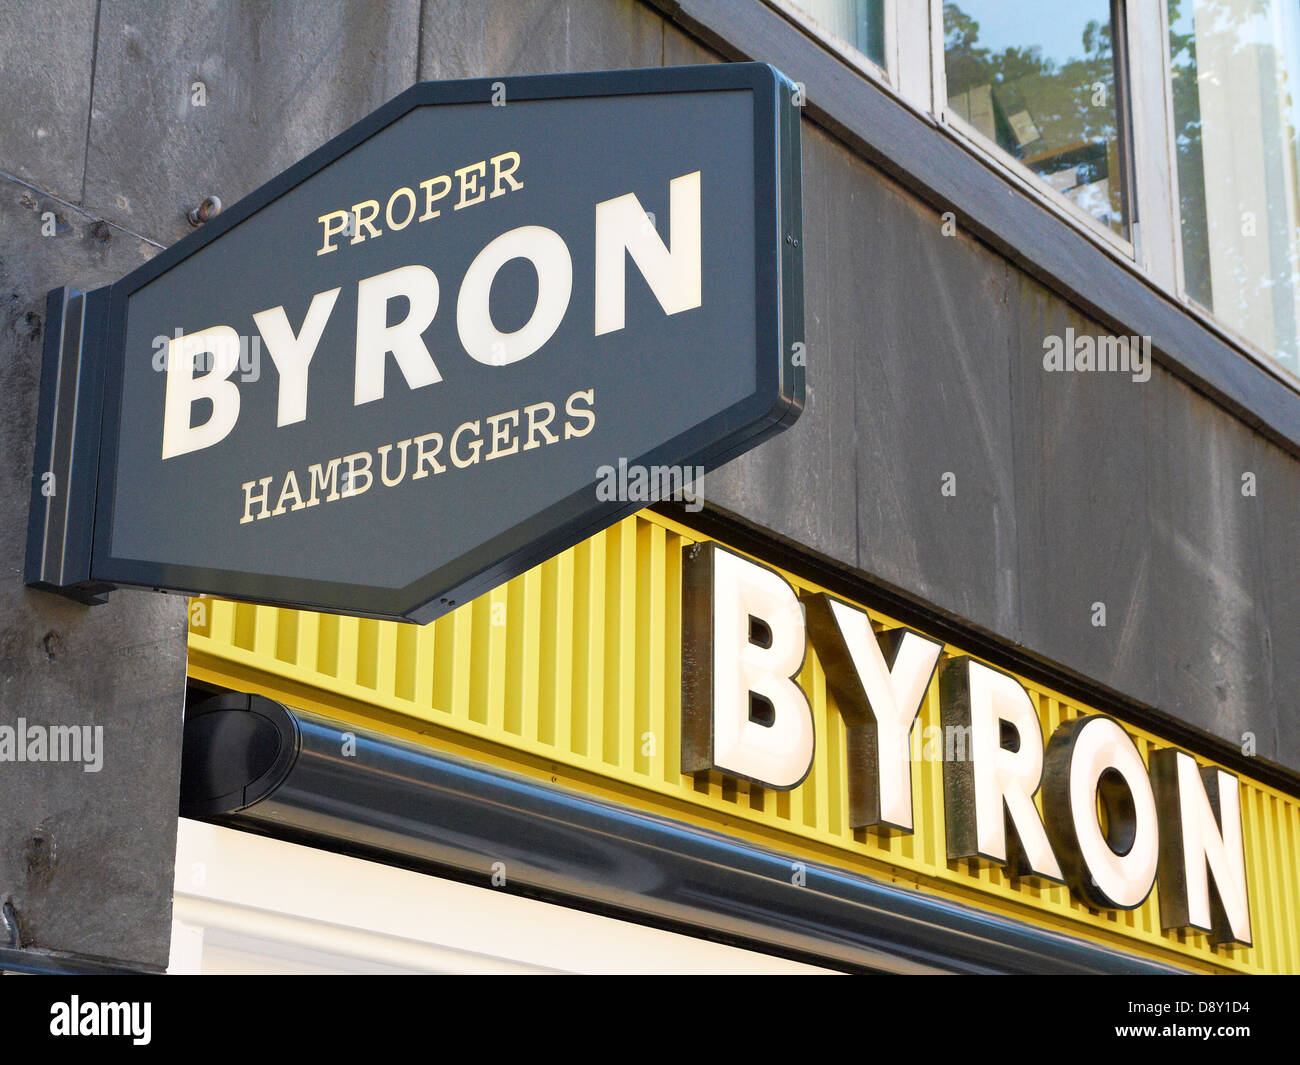 Proper Byron Hamburgers sign on outside wall in Manchester UK Stock Photo